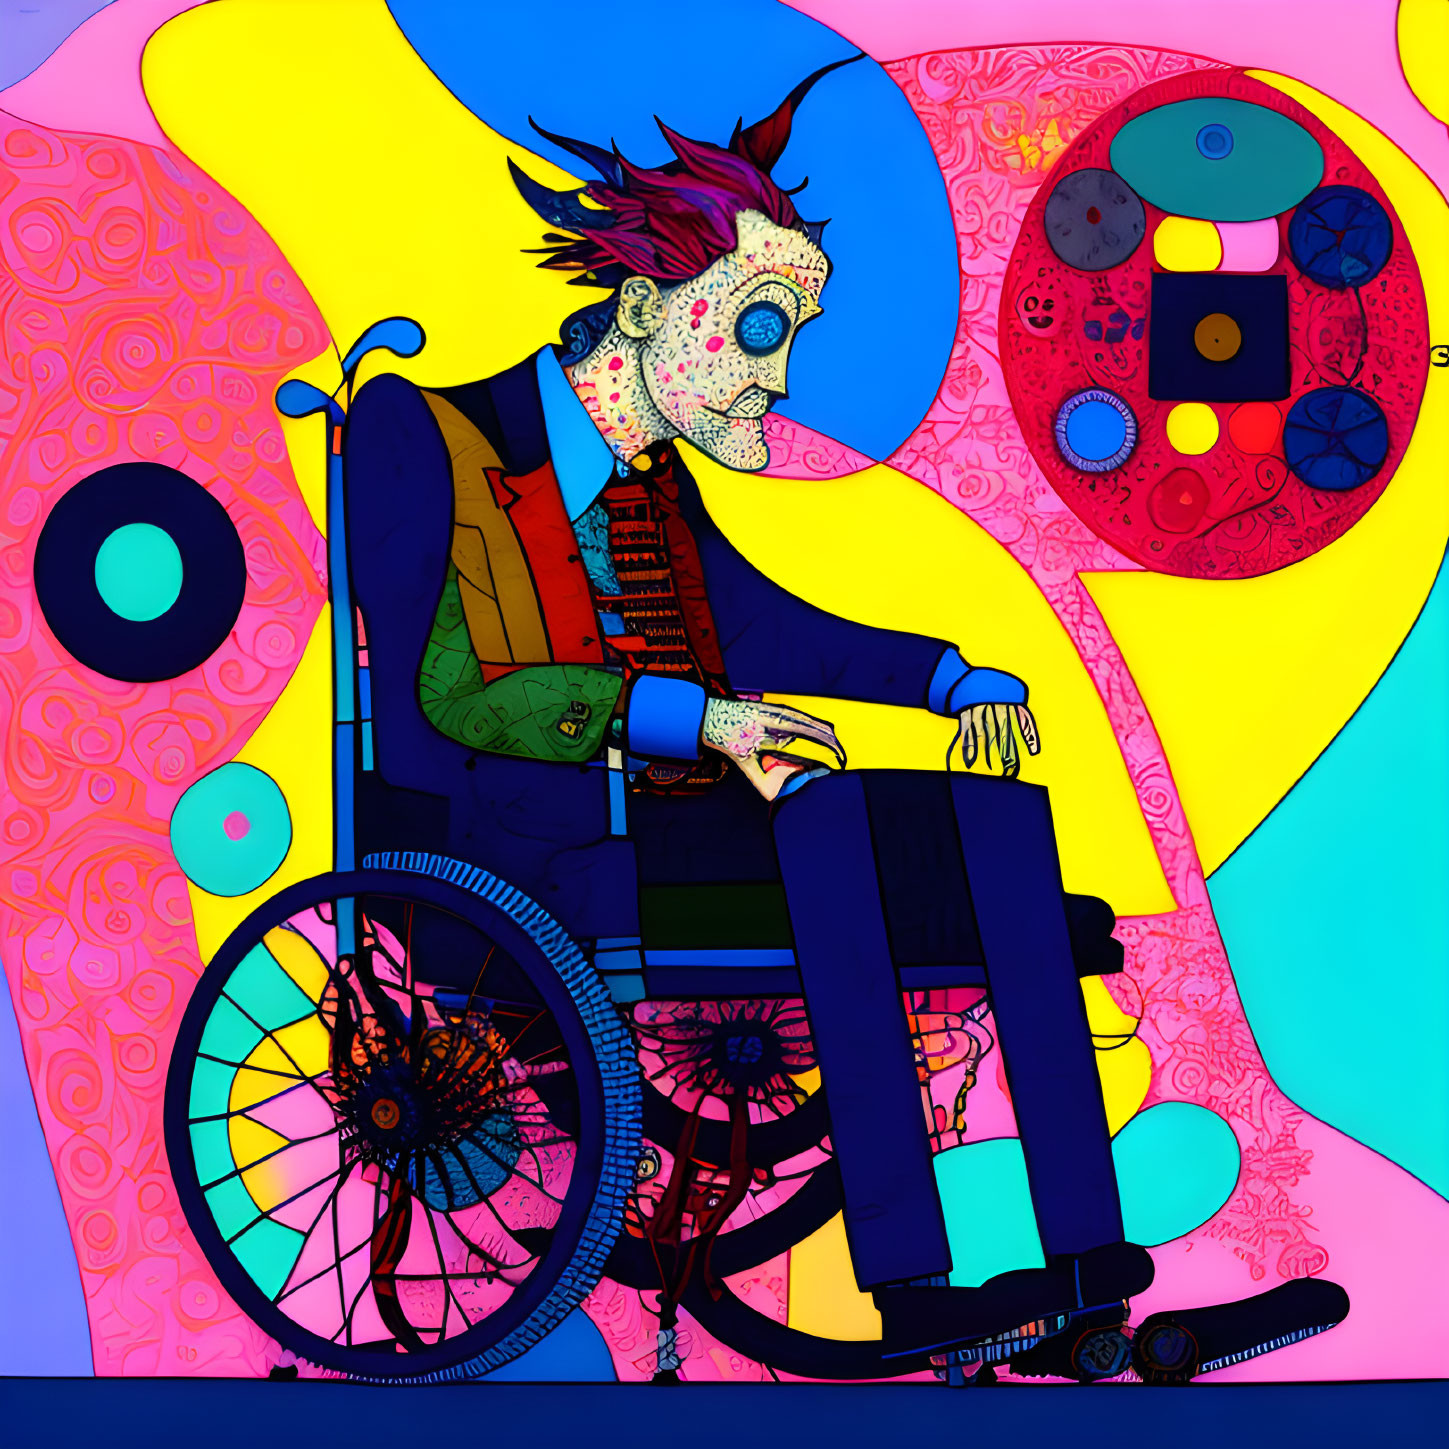 Vibrant Abstract Digital Art: Punk-Inspired Figure in Wheelchair